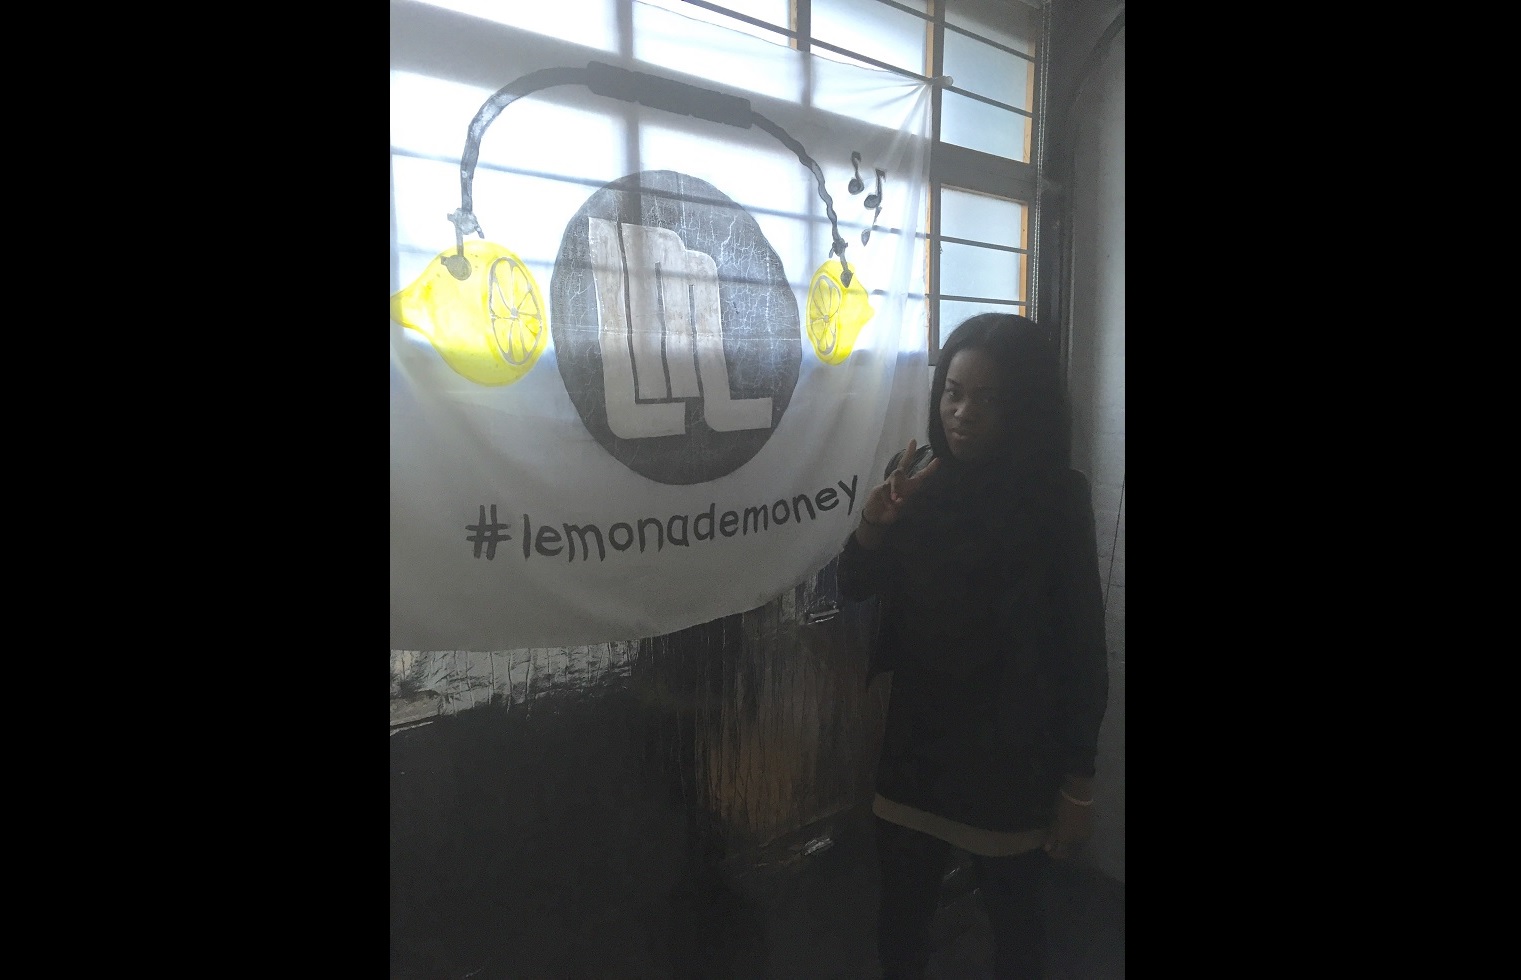 Today I went to see my friends at Lemonade Money, a production company based in London Bridge (and literally almost next door to White Cube Bermondsey – talk about serendipitous?). I couldn’t possibly tell you the details… it’s all very hush hush in the TV world. But I am delighted to see my ideas begin to come to fruition. Presenting art documentaries is the big goal for me, so a lot of my efforts are going into TV projects.